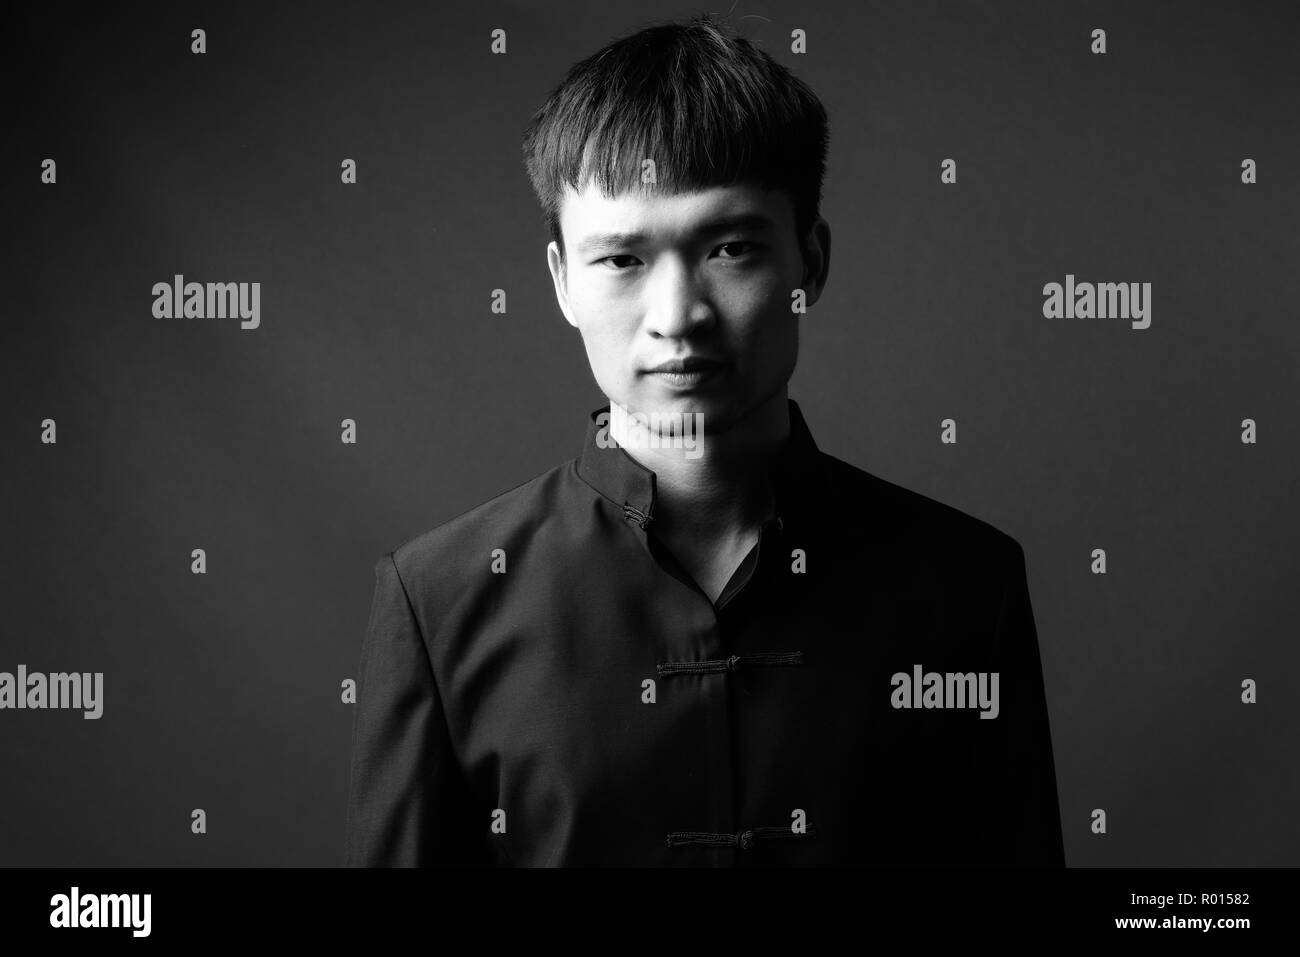 Studio shot of young Chinese man in black and white Stock Photo